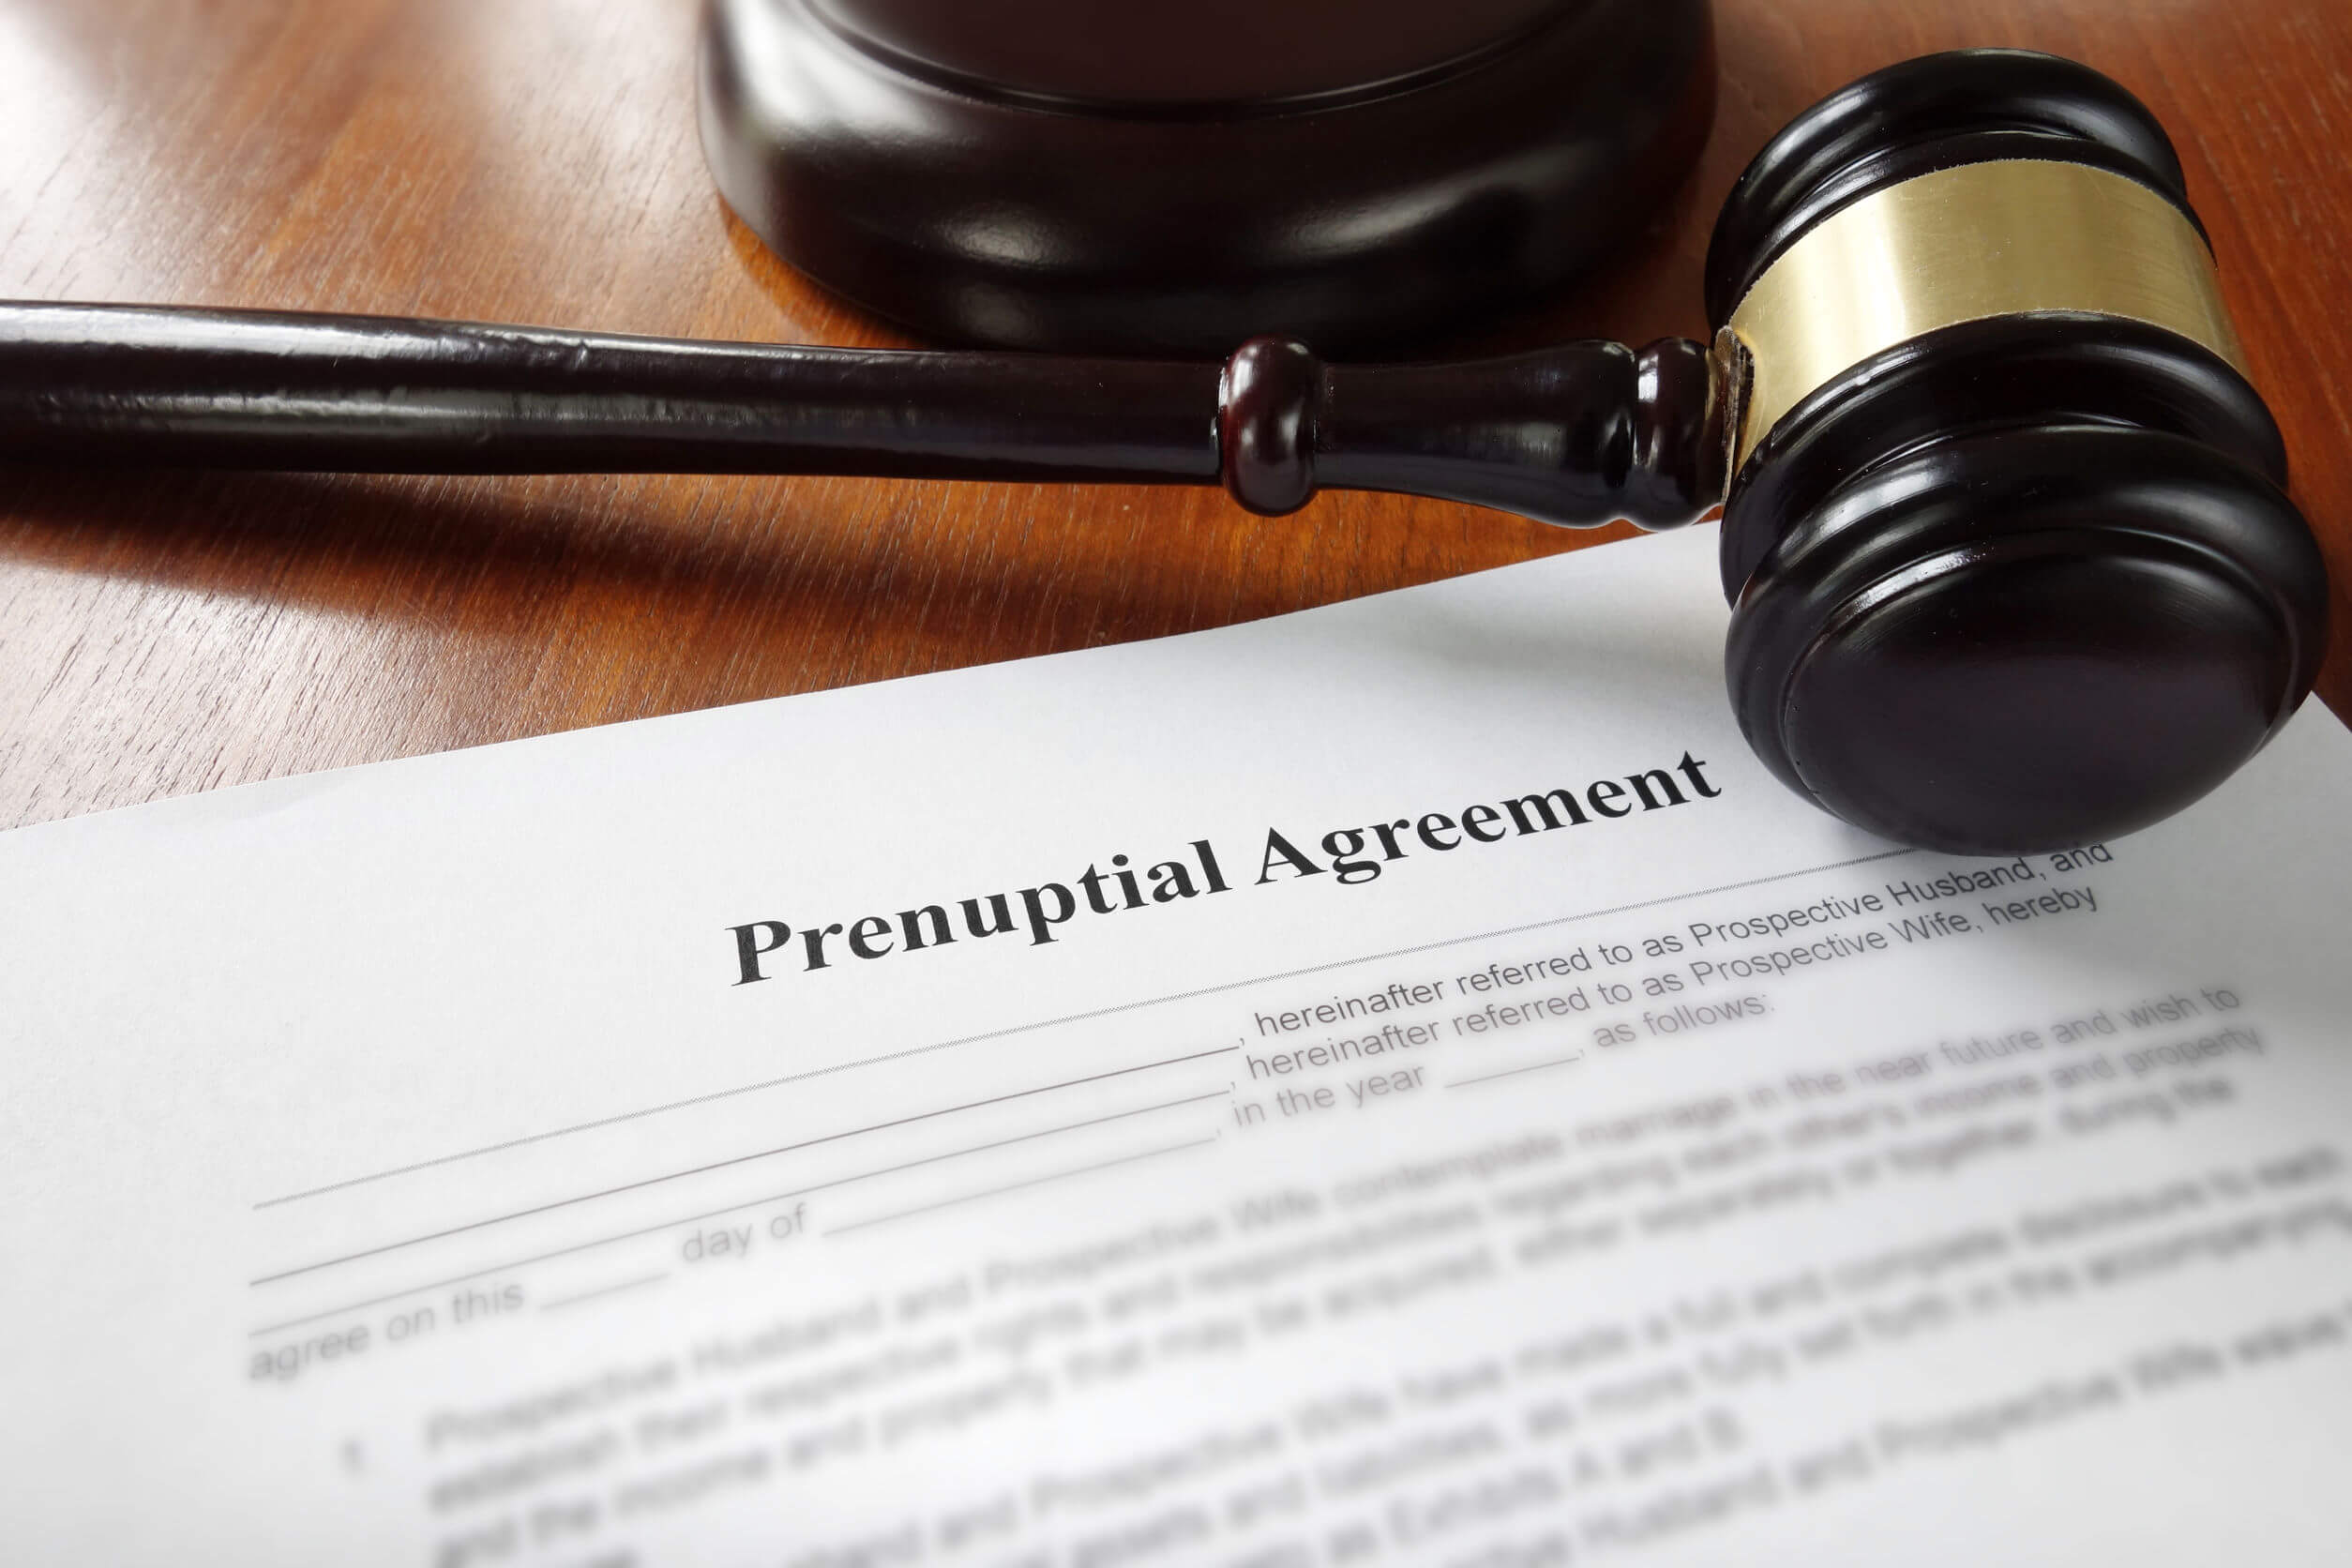 UK Family Law and Prenuptial agreements